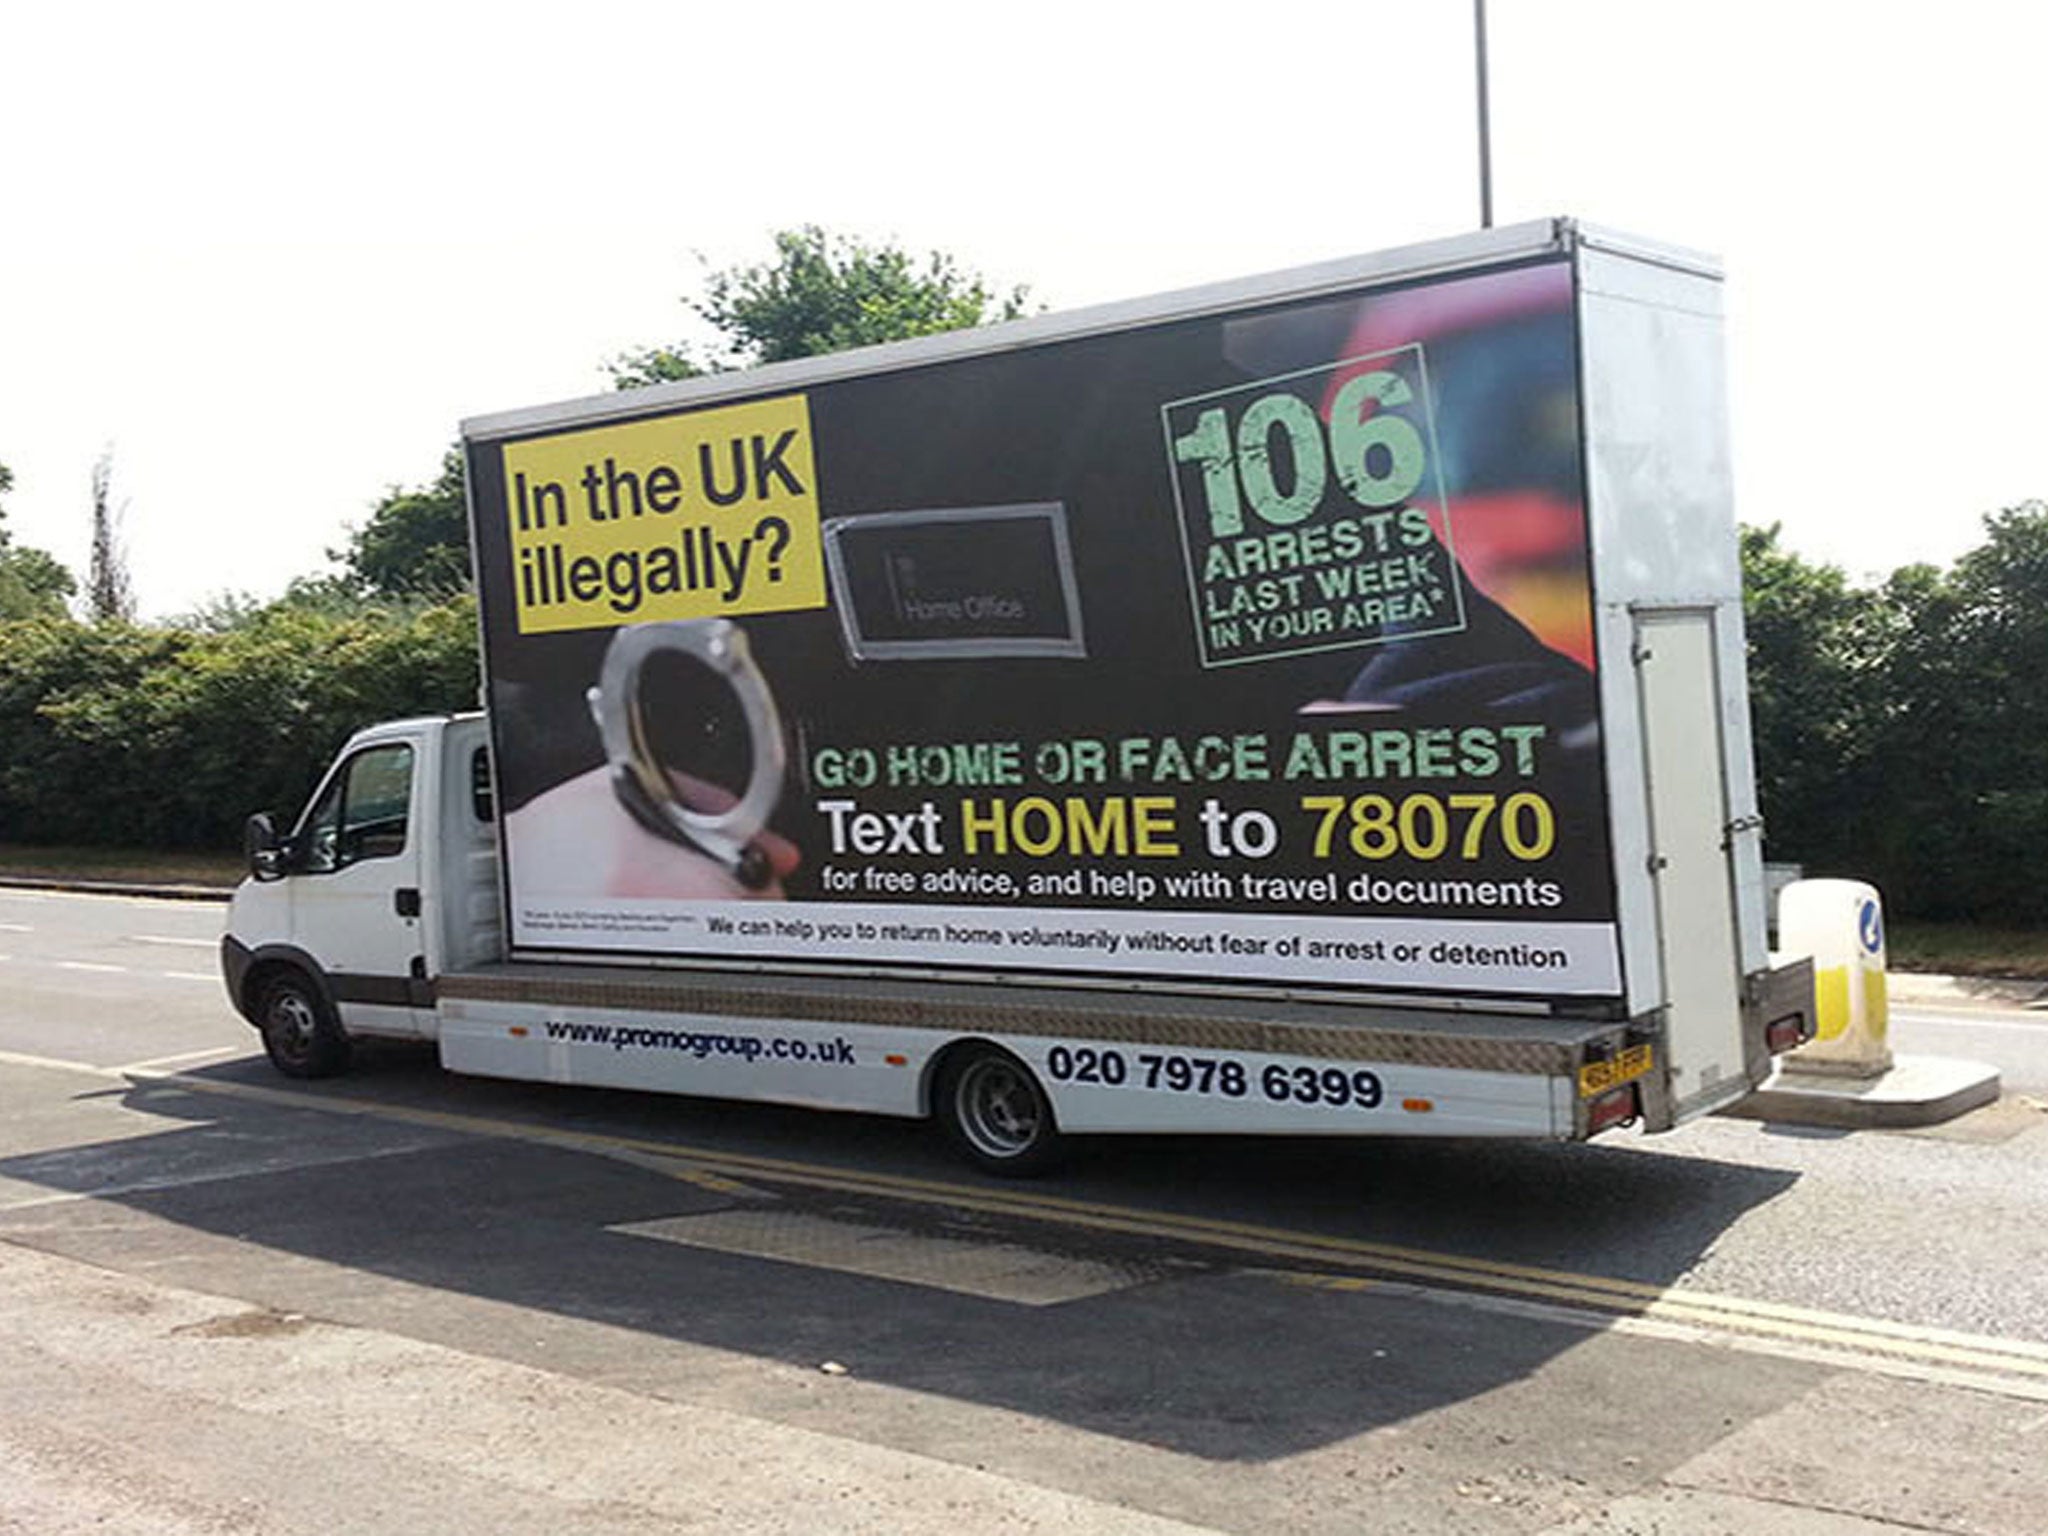 Mark Harper said the Home Office could extend the mobile advan posters nationwide